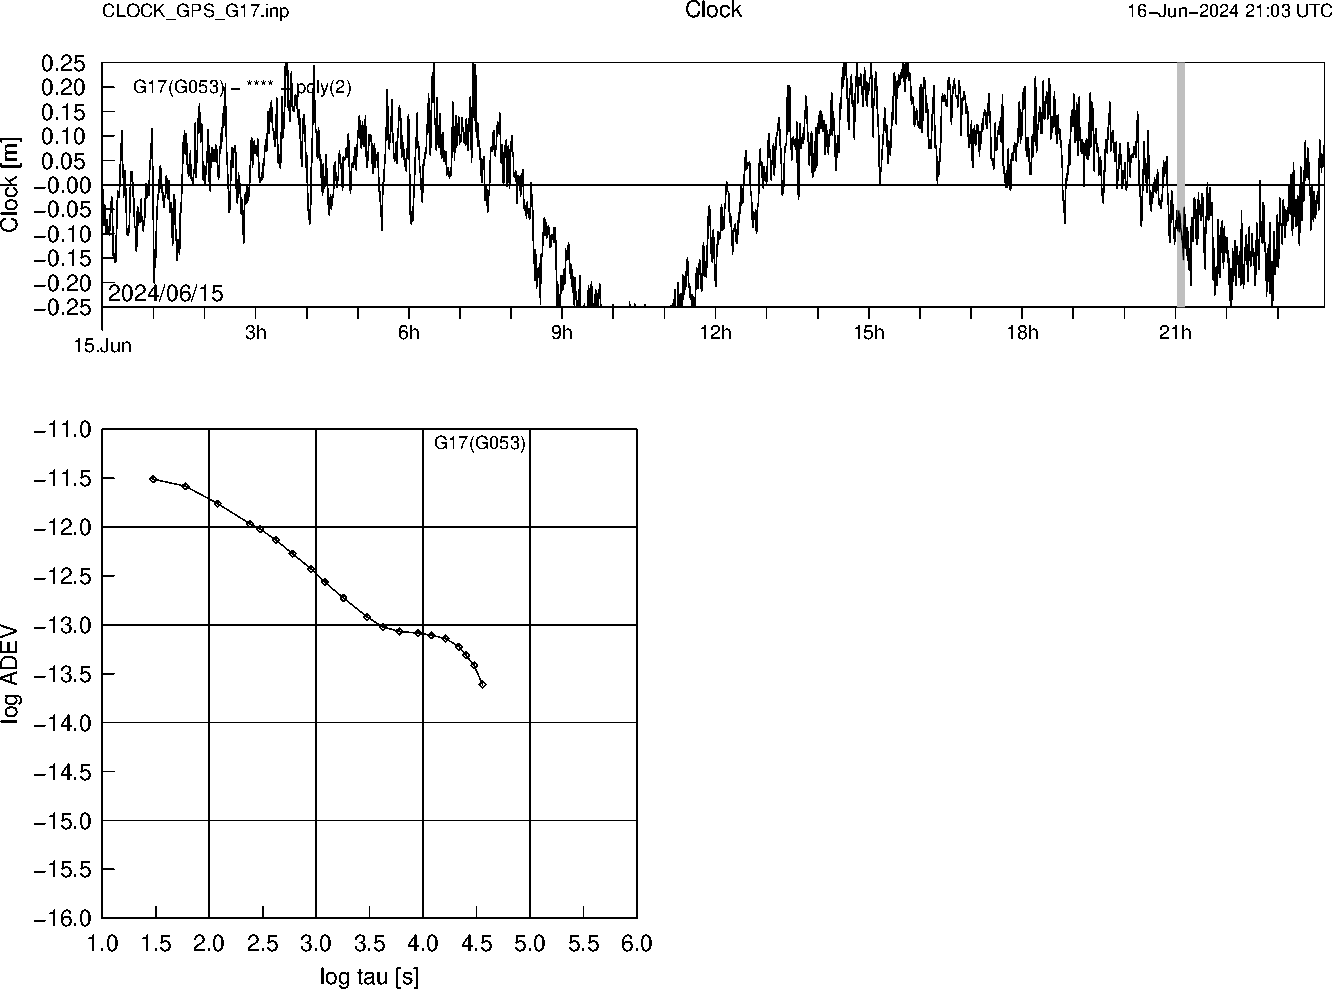 GPS G17 Clock Time Series and Allan Deviation